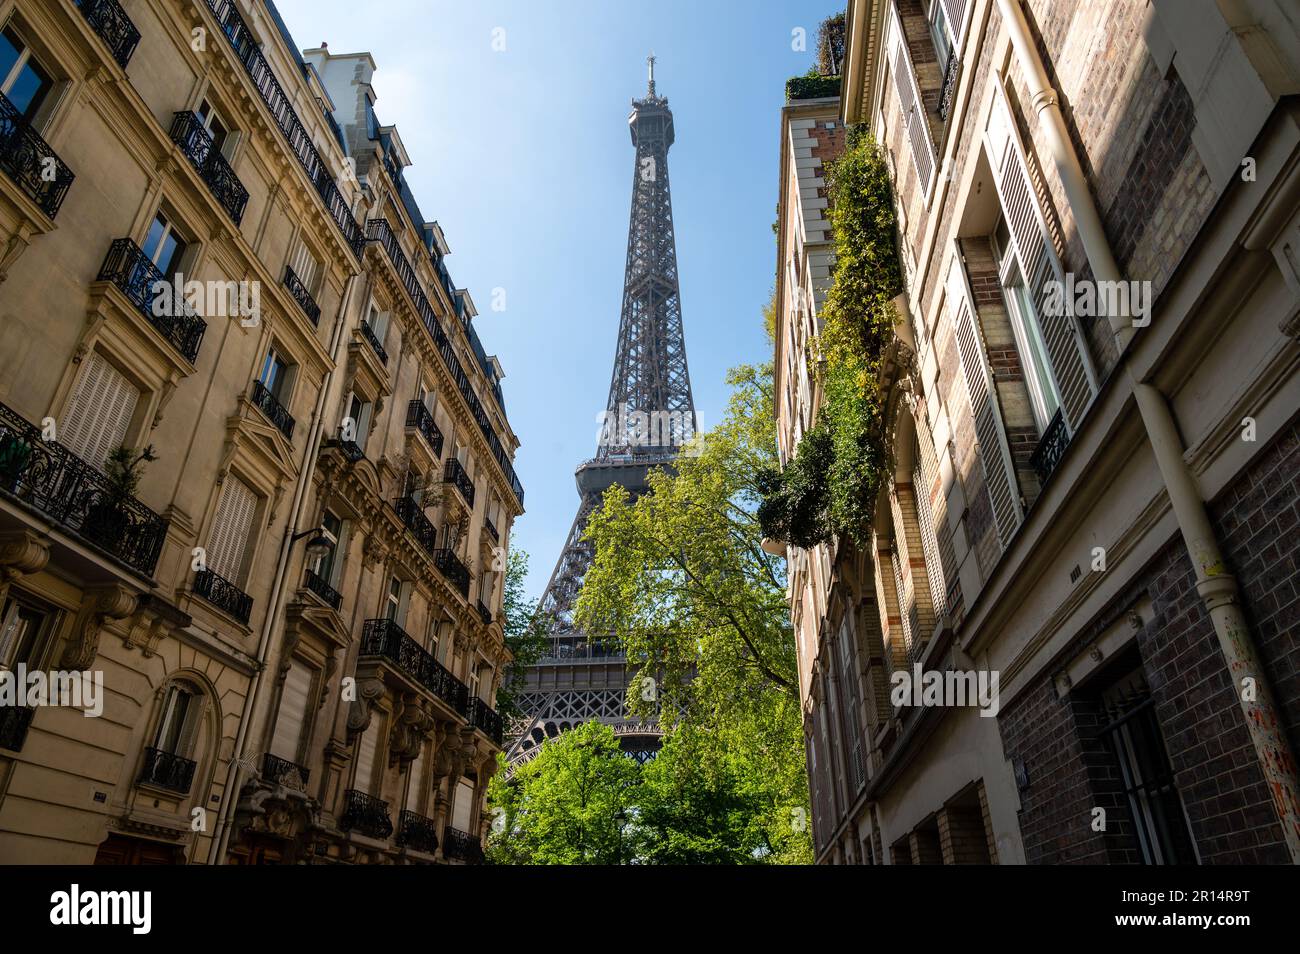 The Eiffel Tower view between palaces in Rue de l'Universite street ...